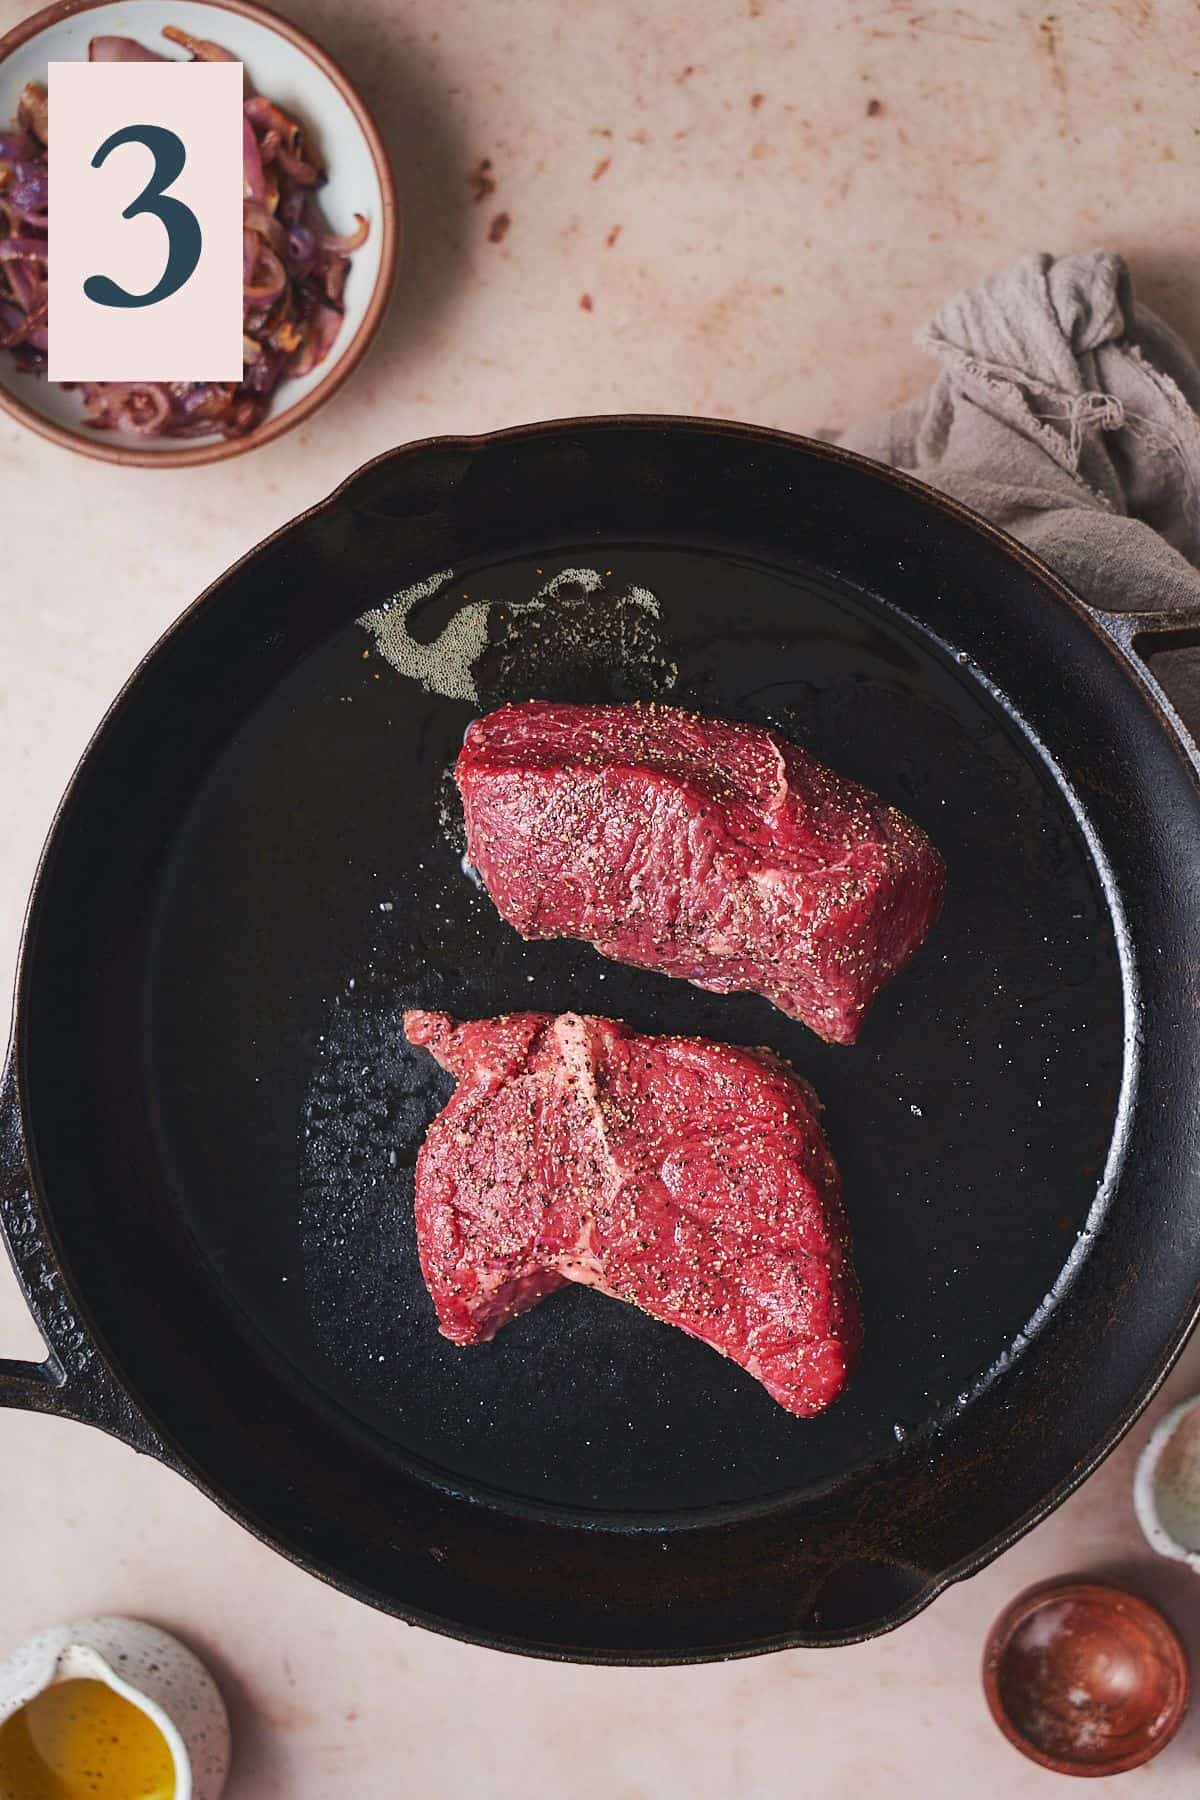 raw steaks seasoned with salt and pepper in a hot cast iron skillet.